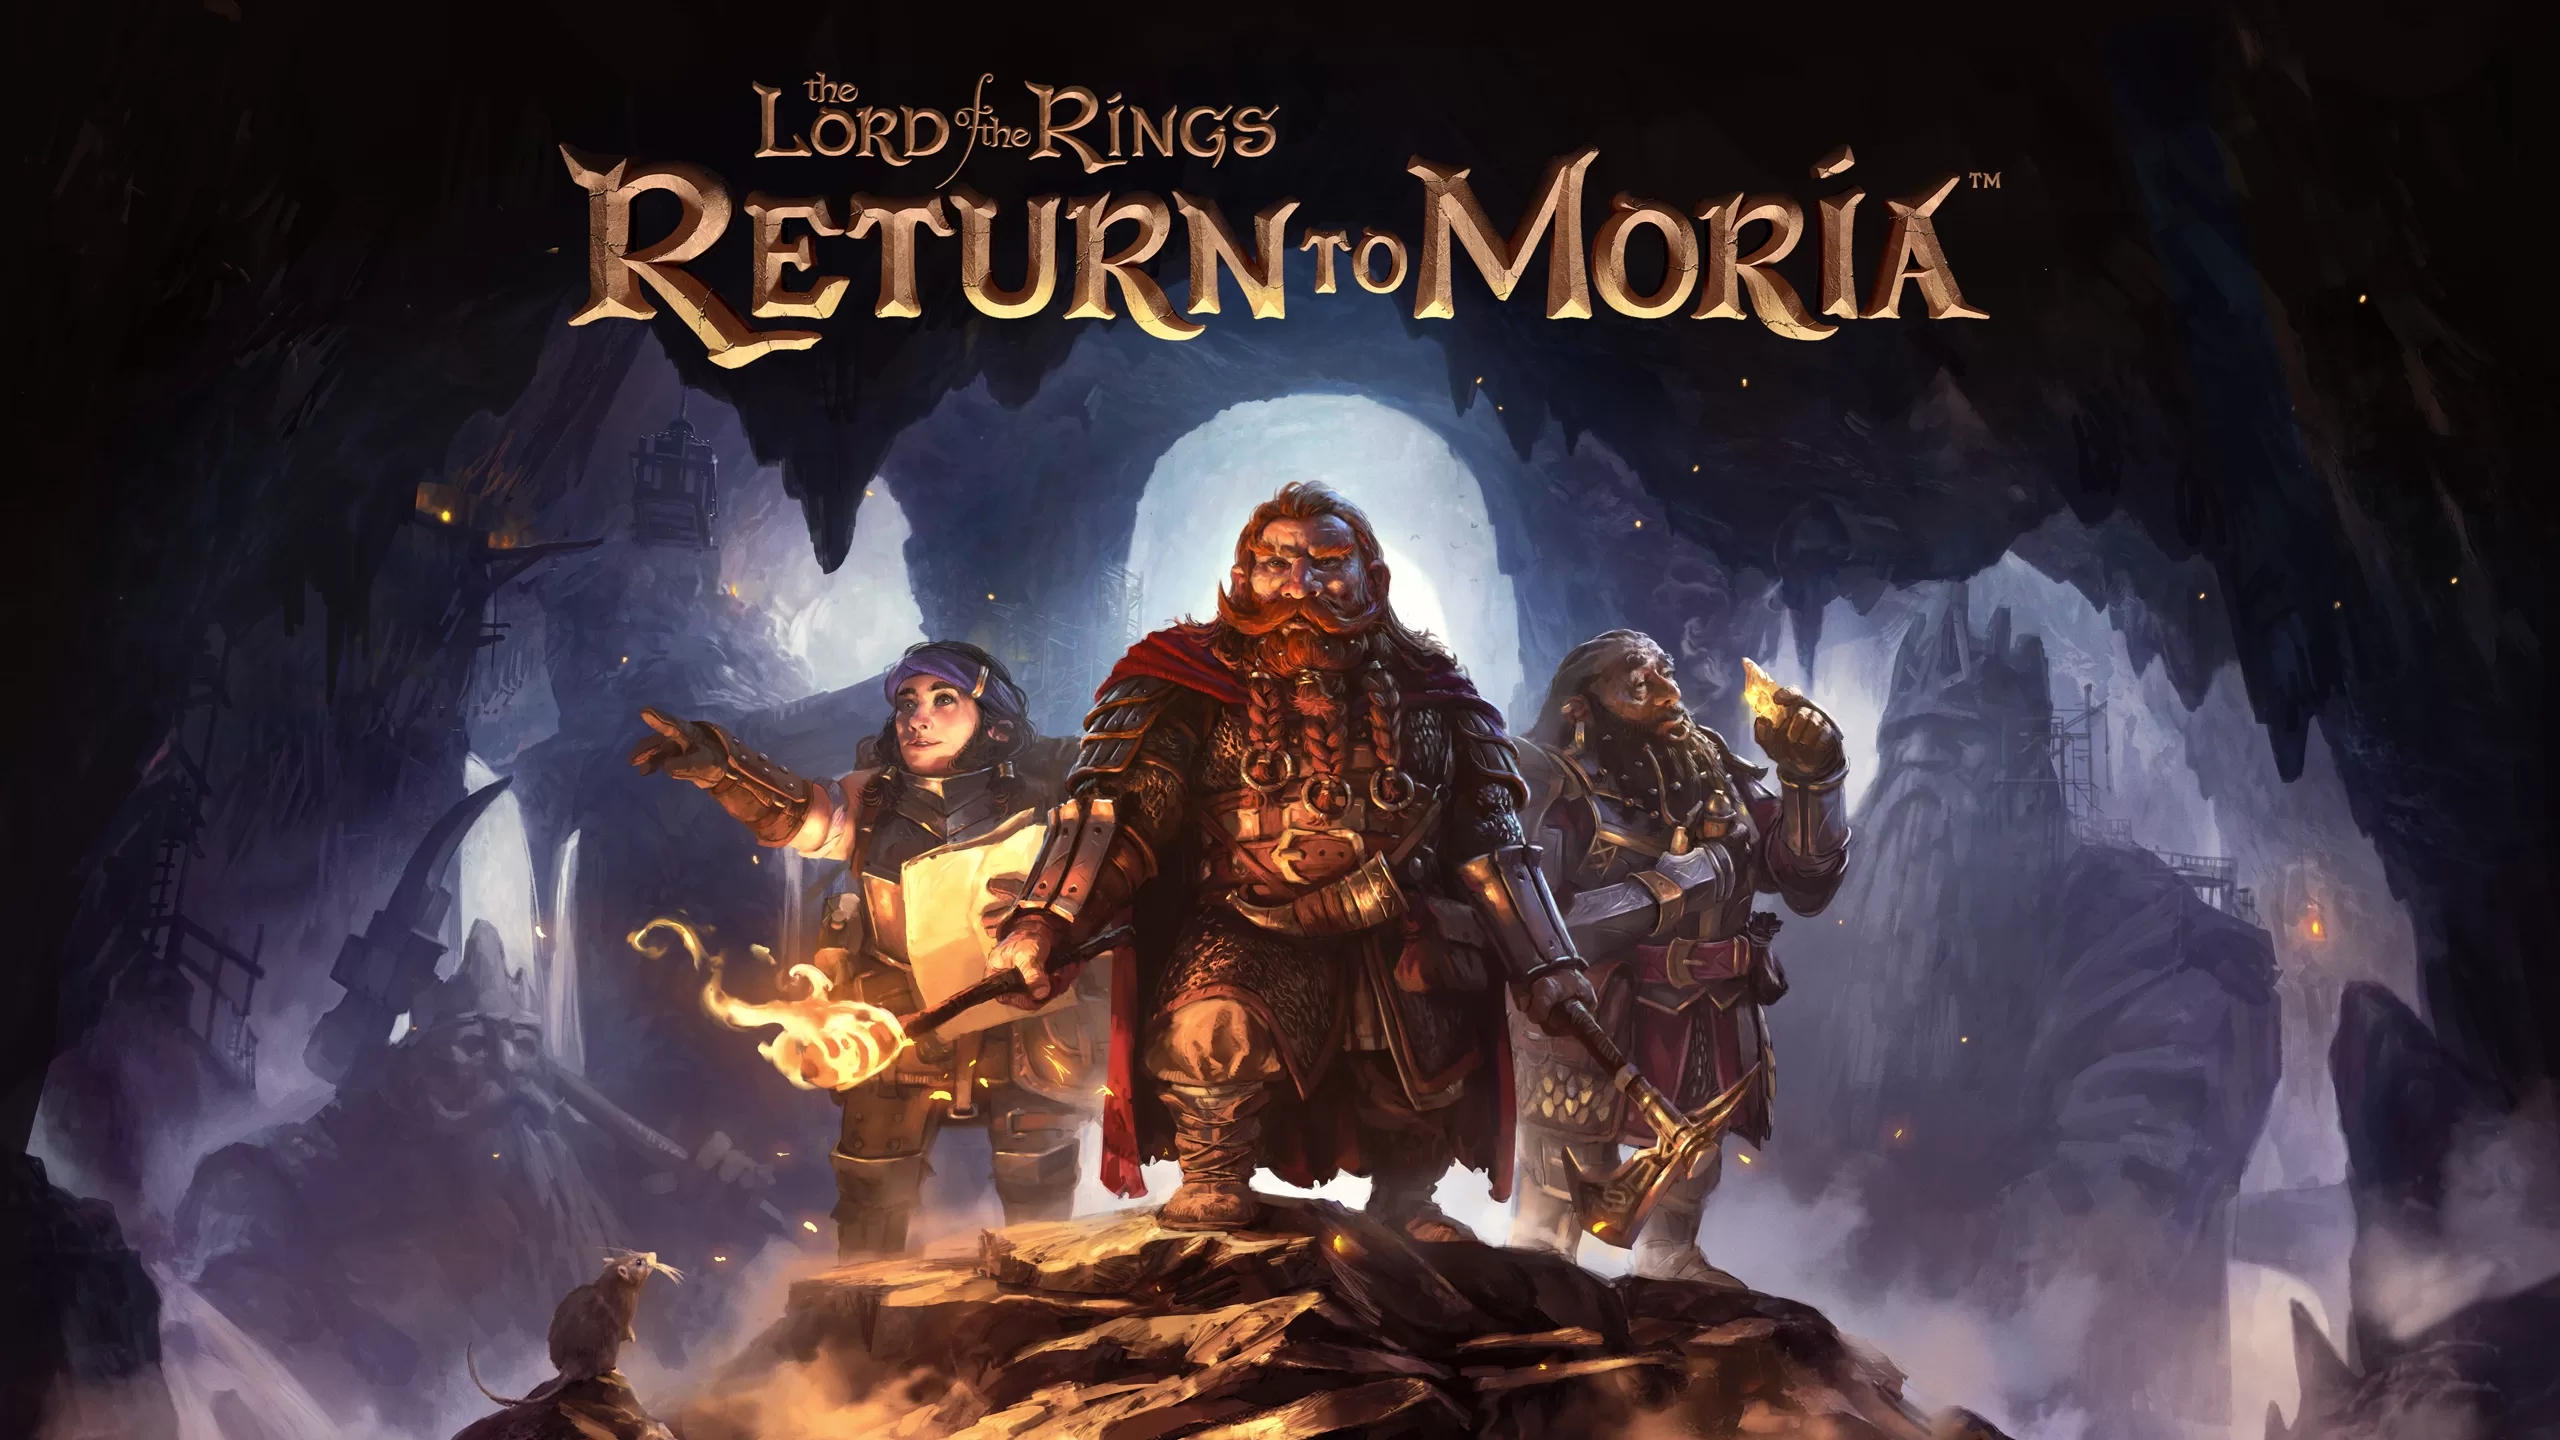 The Lord of the Rings: Return to Moria – A Journey into Middle-earth’s Heart